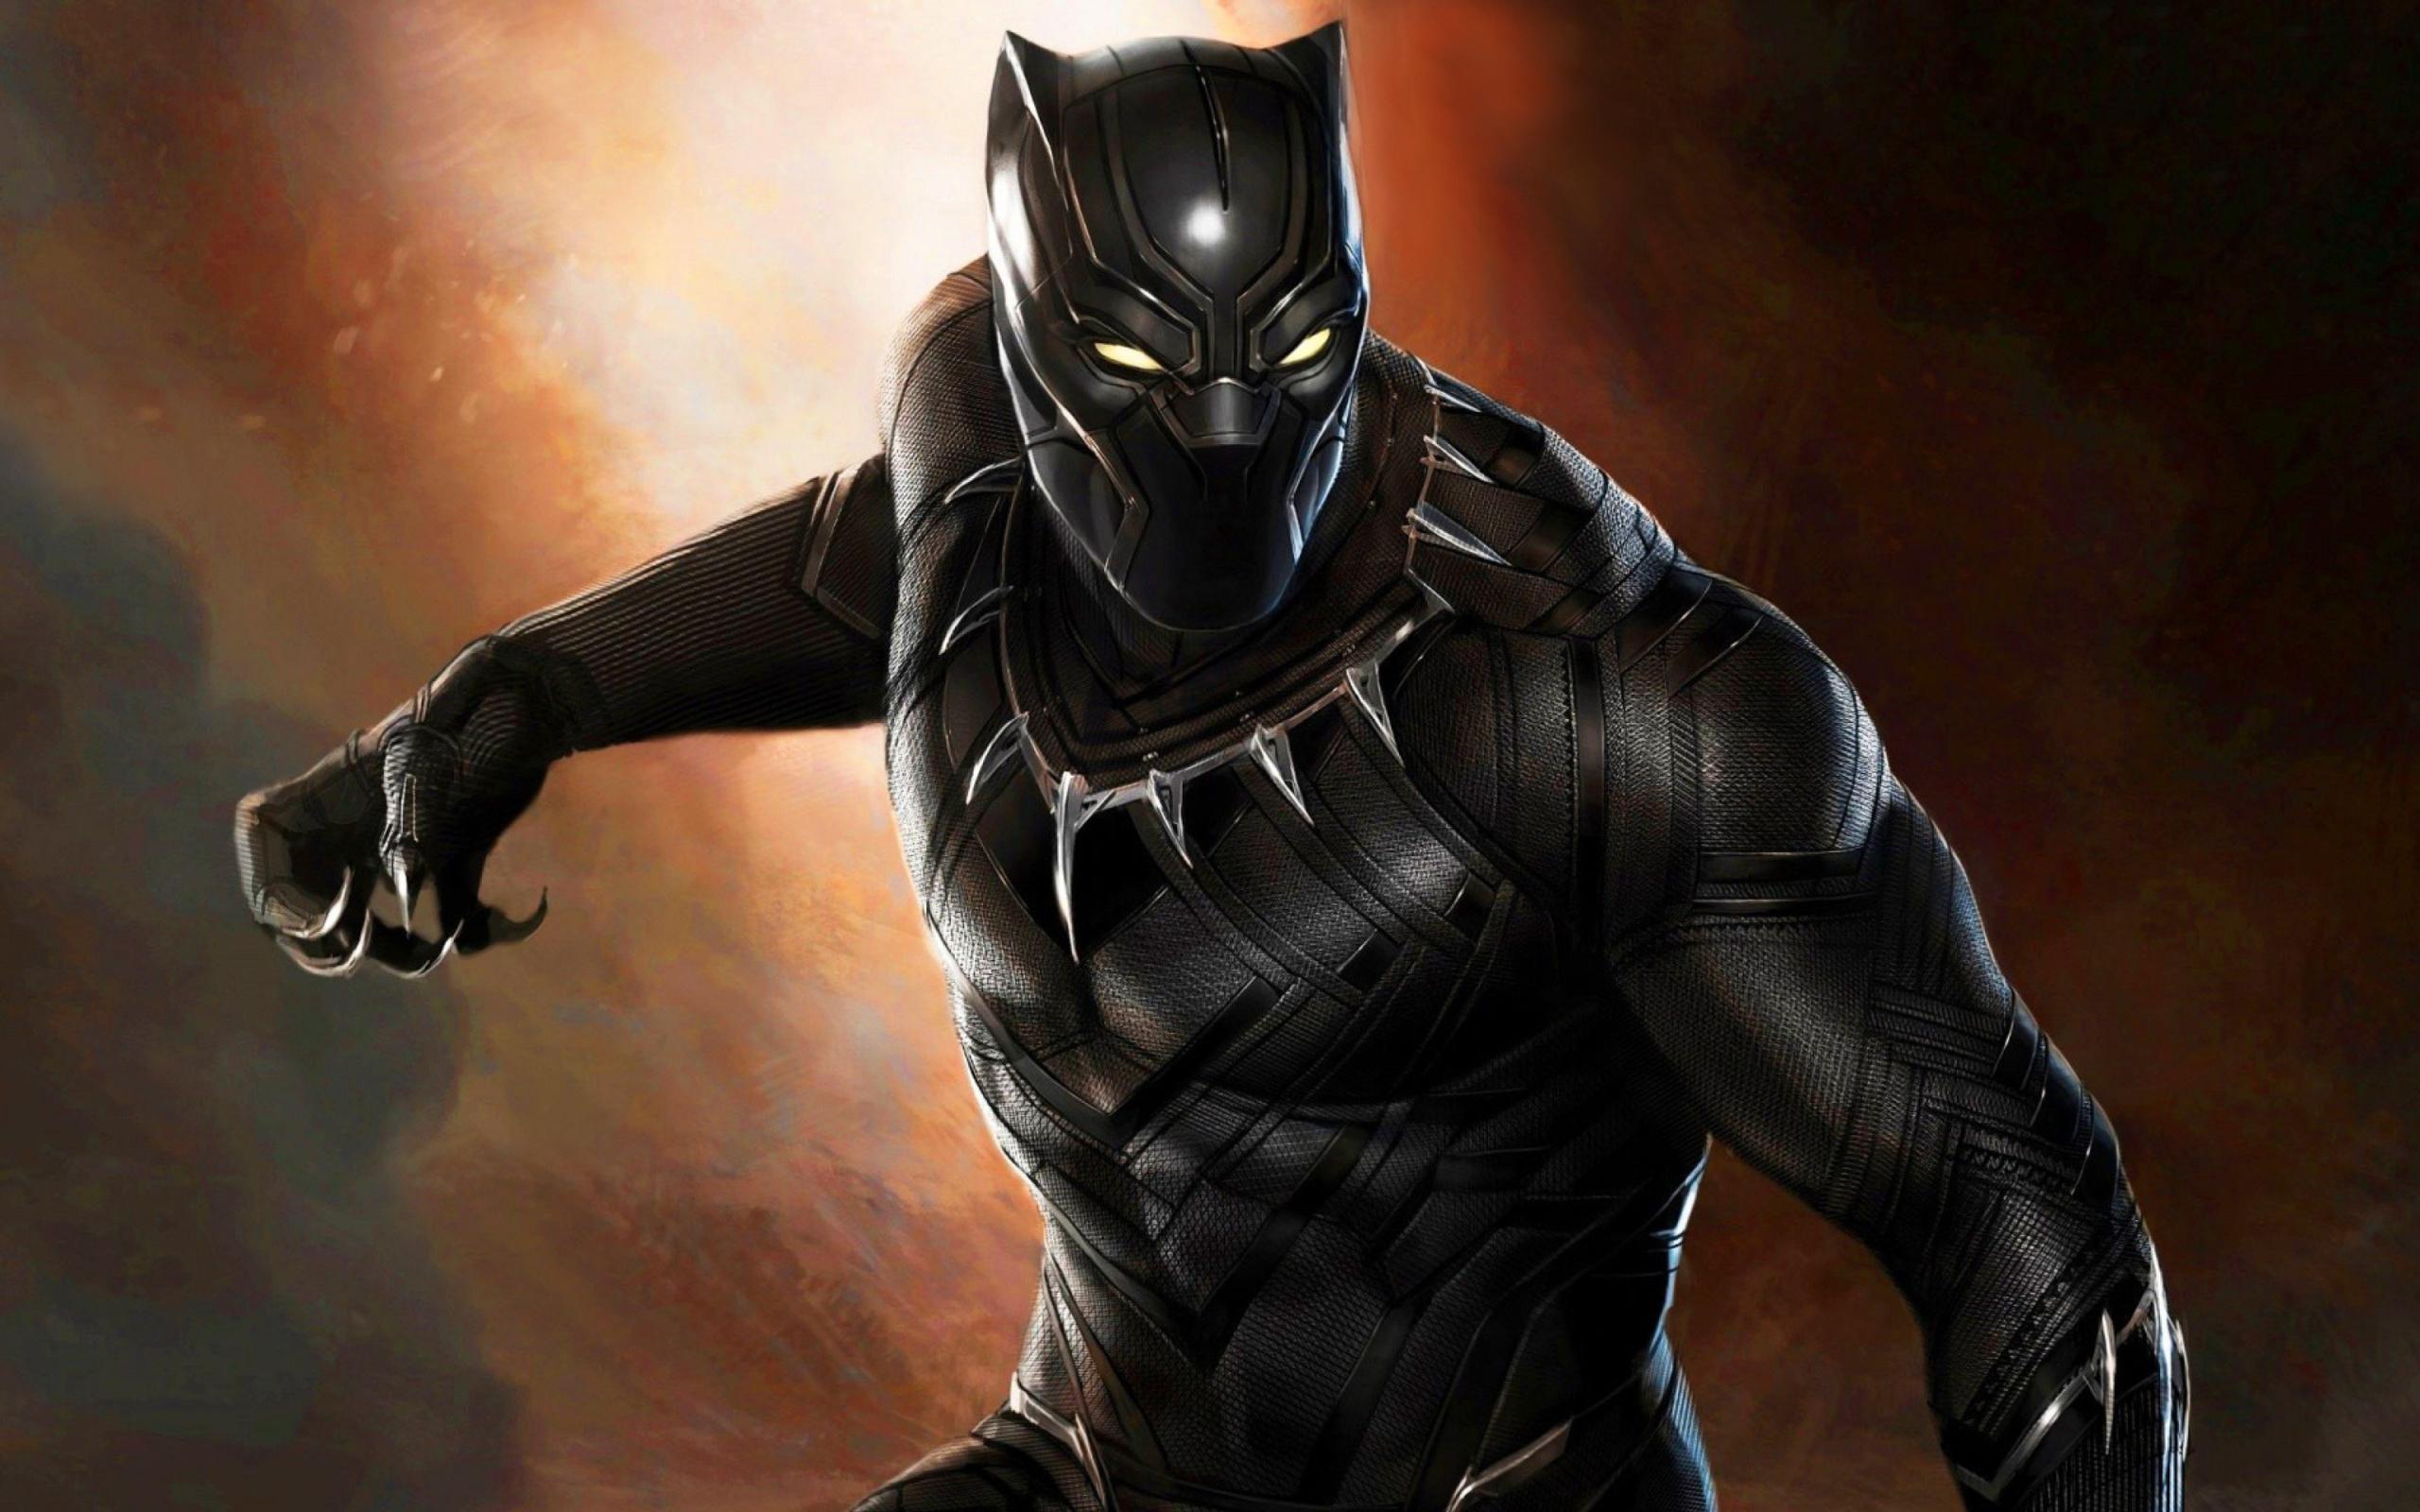 2560 x 1600 · jpeg - Black Panther Super Hero, HD Movies, 4k Wallpapers, Images, Backgrounds ...